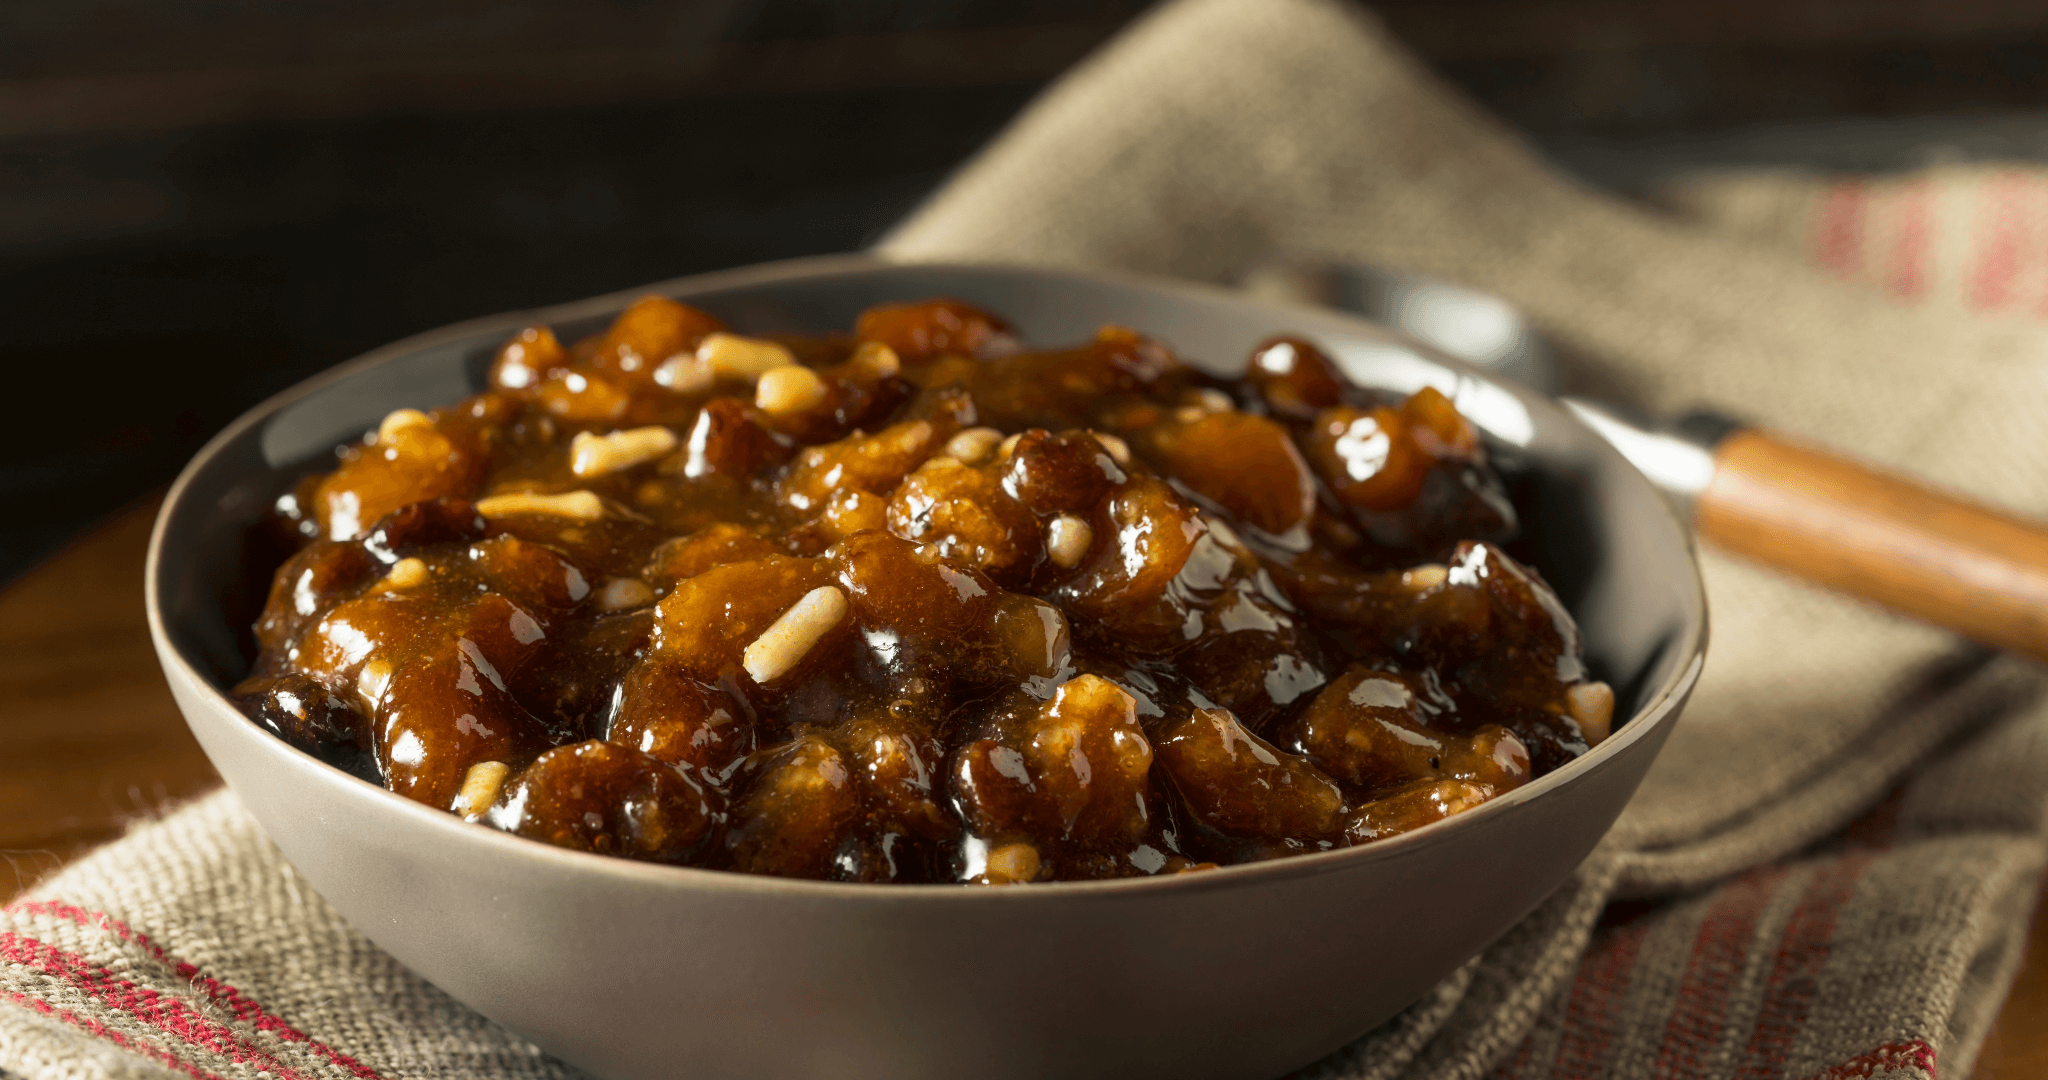 Mincemeat in a bowl